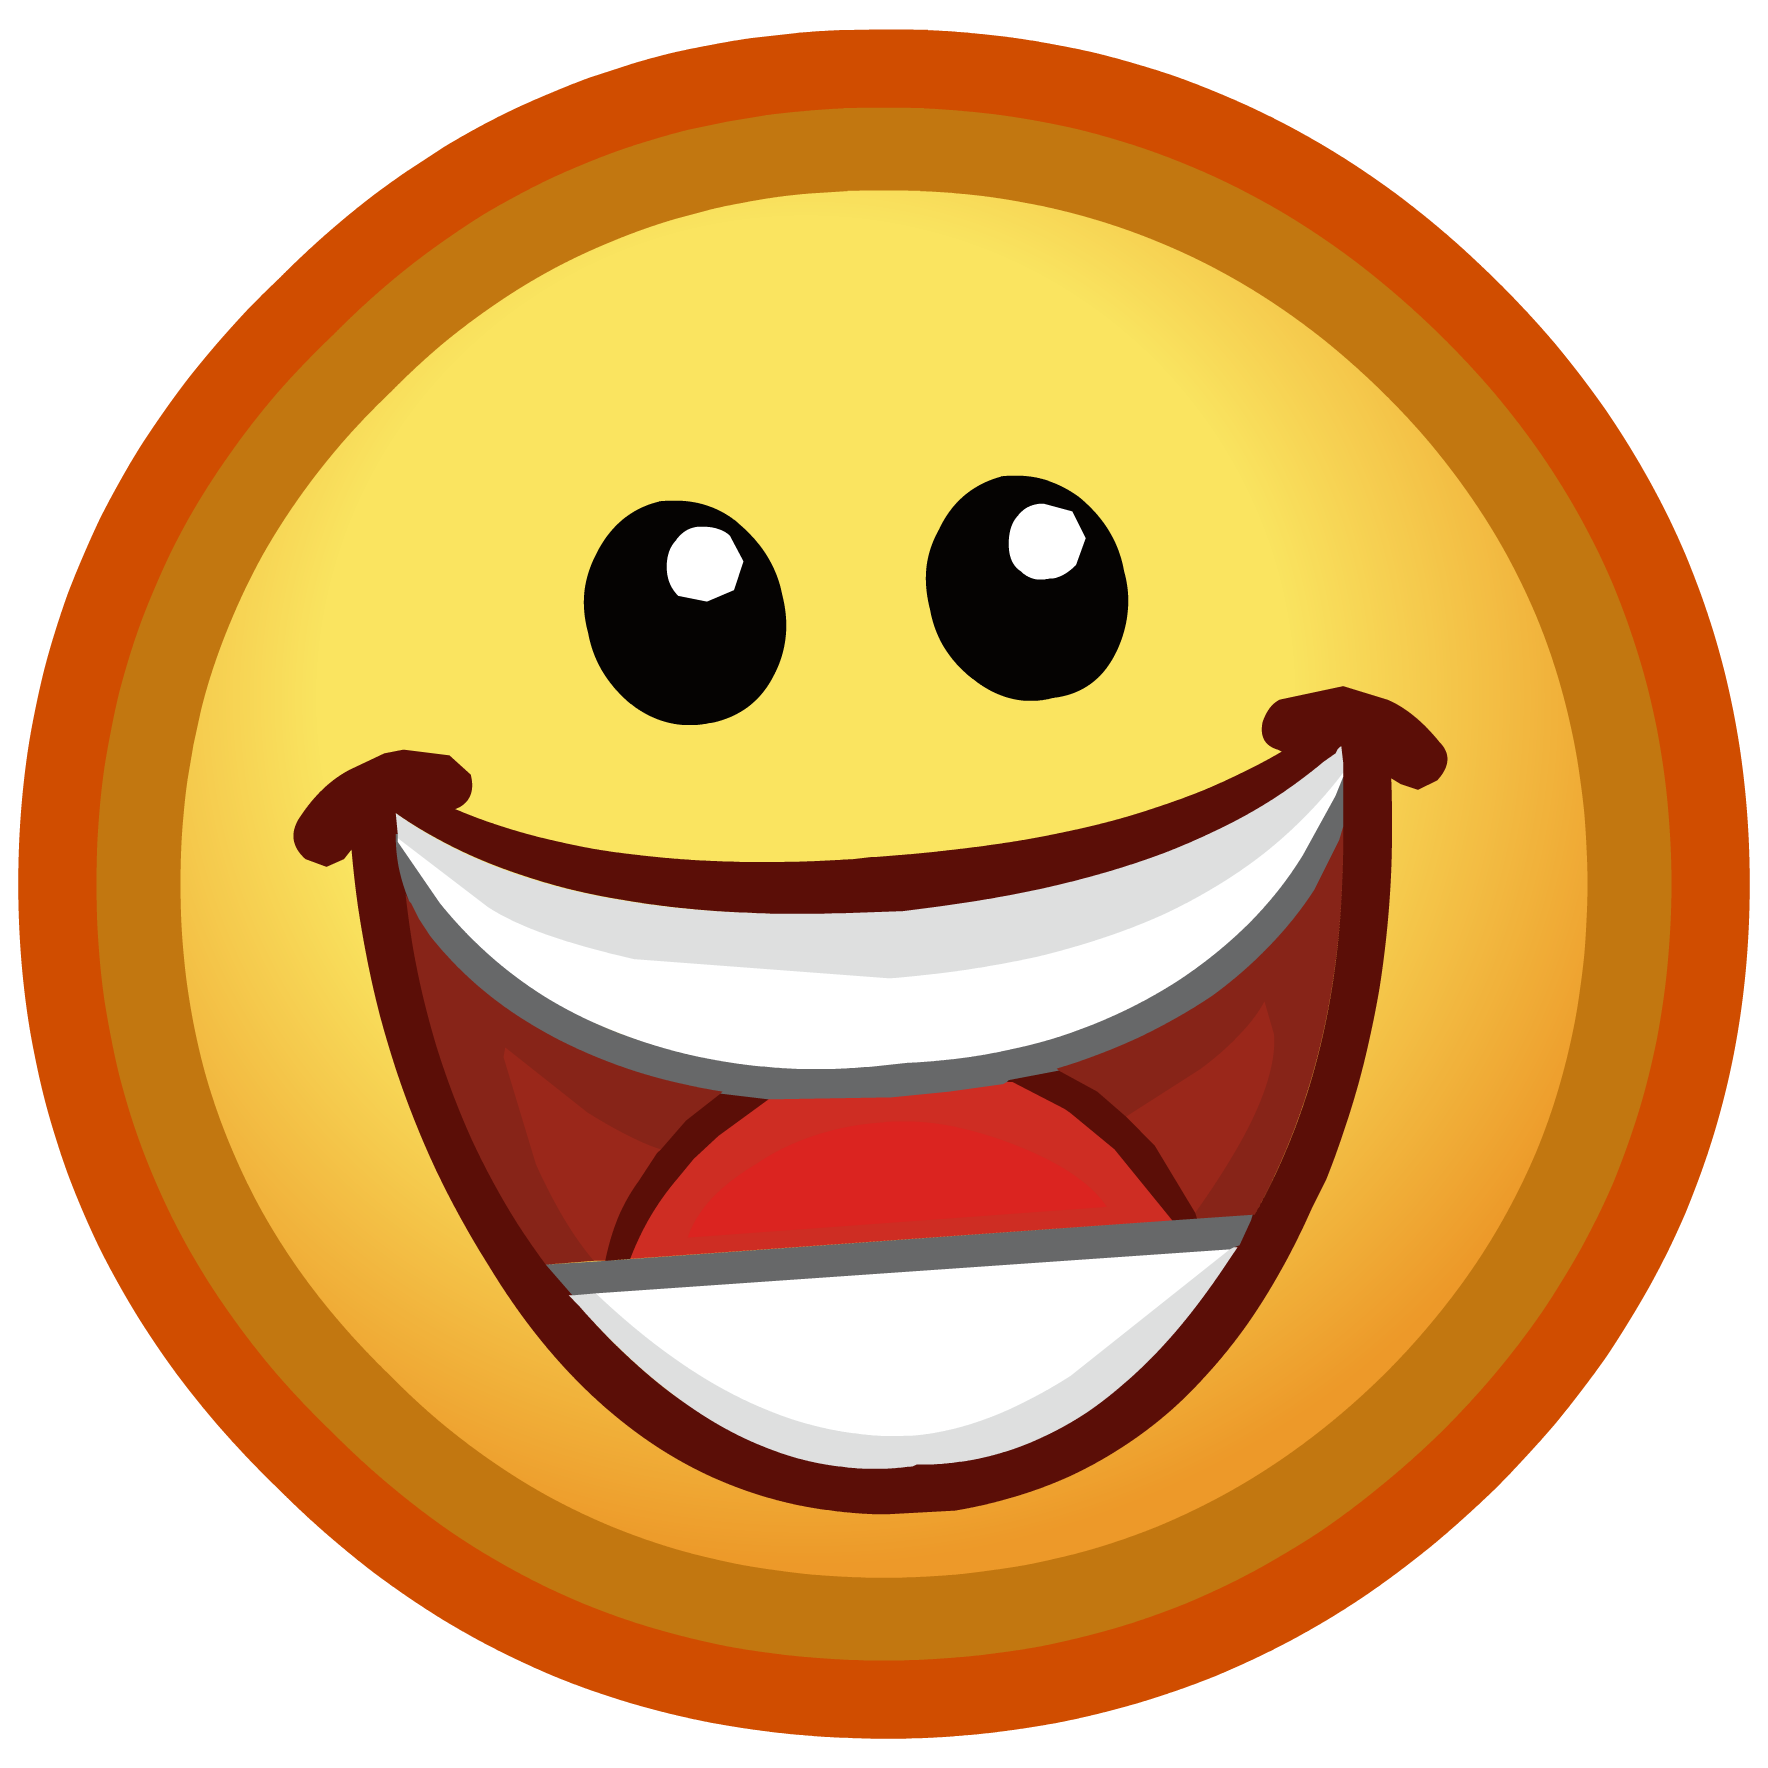 Image - Put on your happy face.png - Club Penguin Wiki - The free